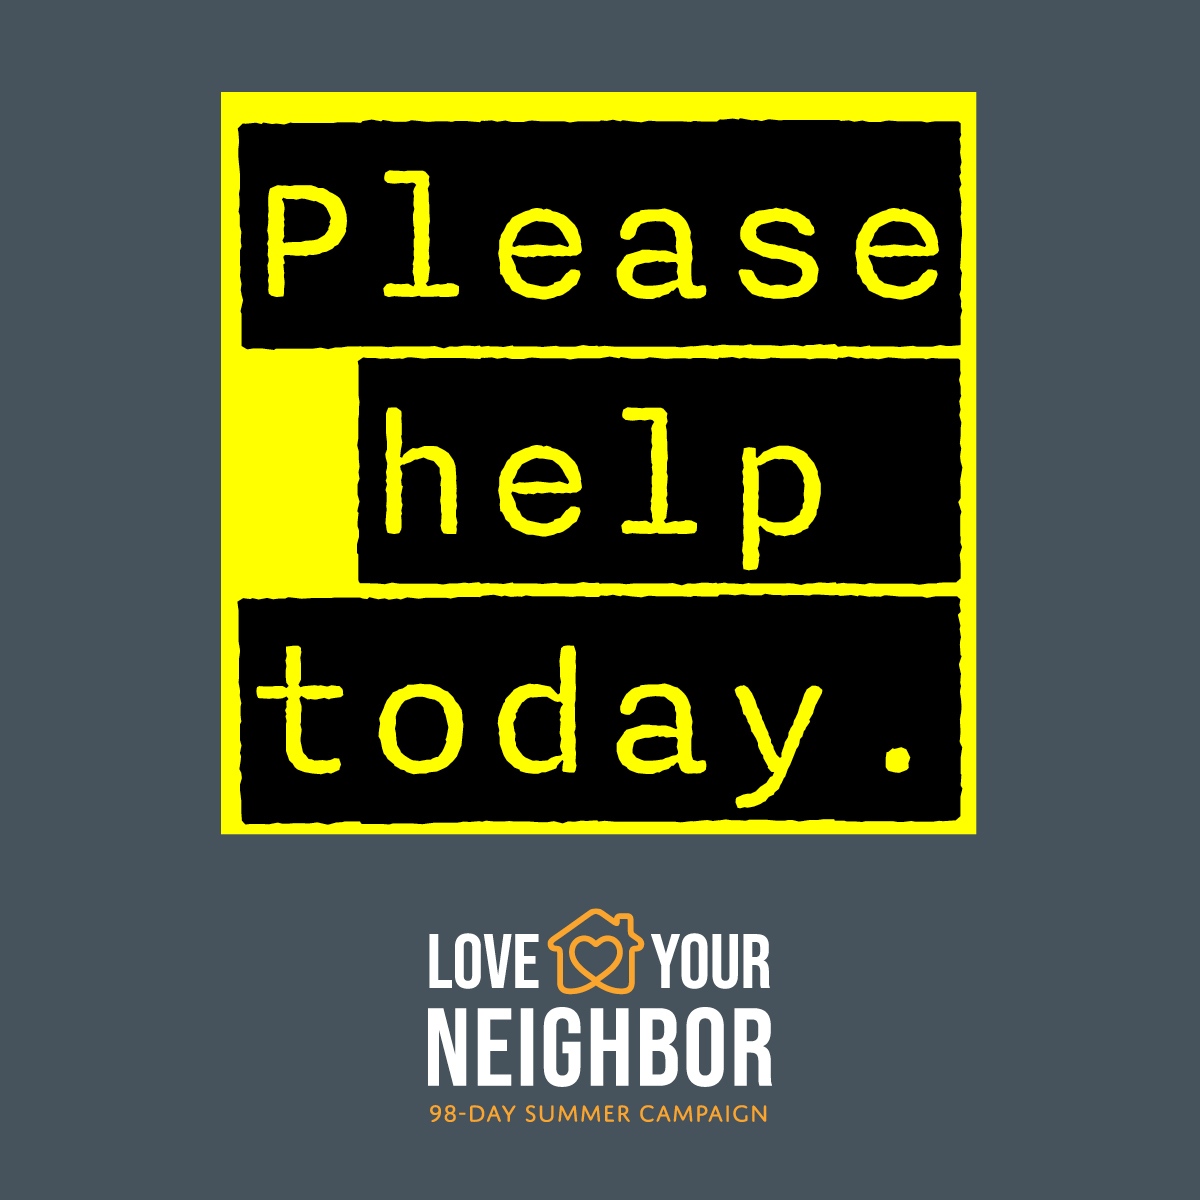 ☀️ 🏖️ Join our #LoveYourNeighbor summer campaign and help impact lives all summer long! 💜💙💚 #LoveYourNeighbors by sharing a gift to help them today! l8r.it/uPFa